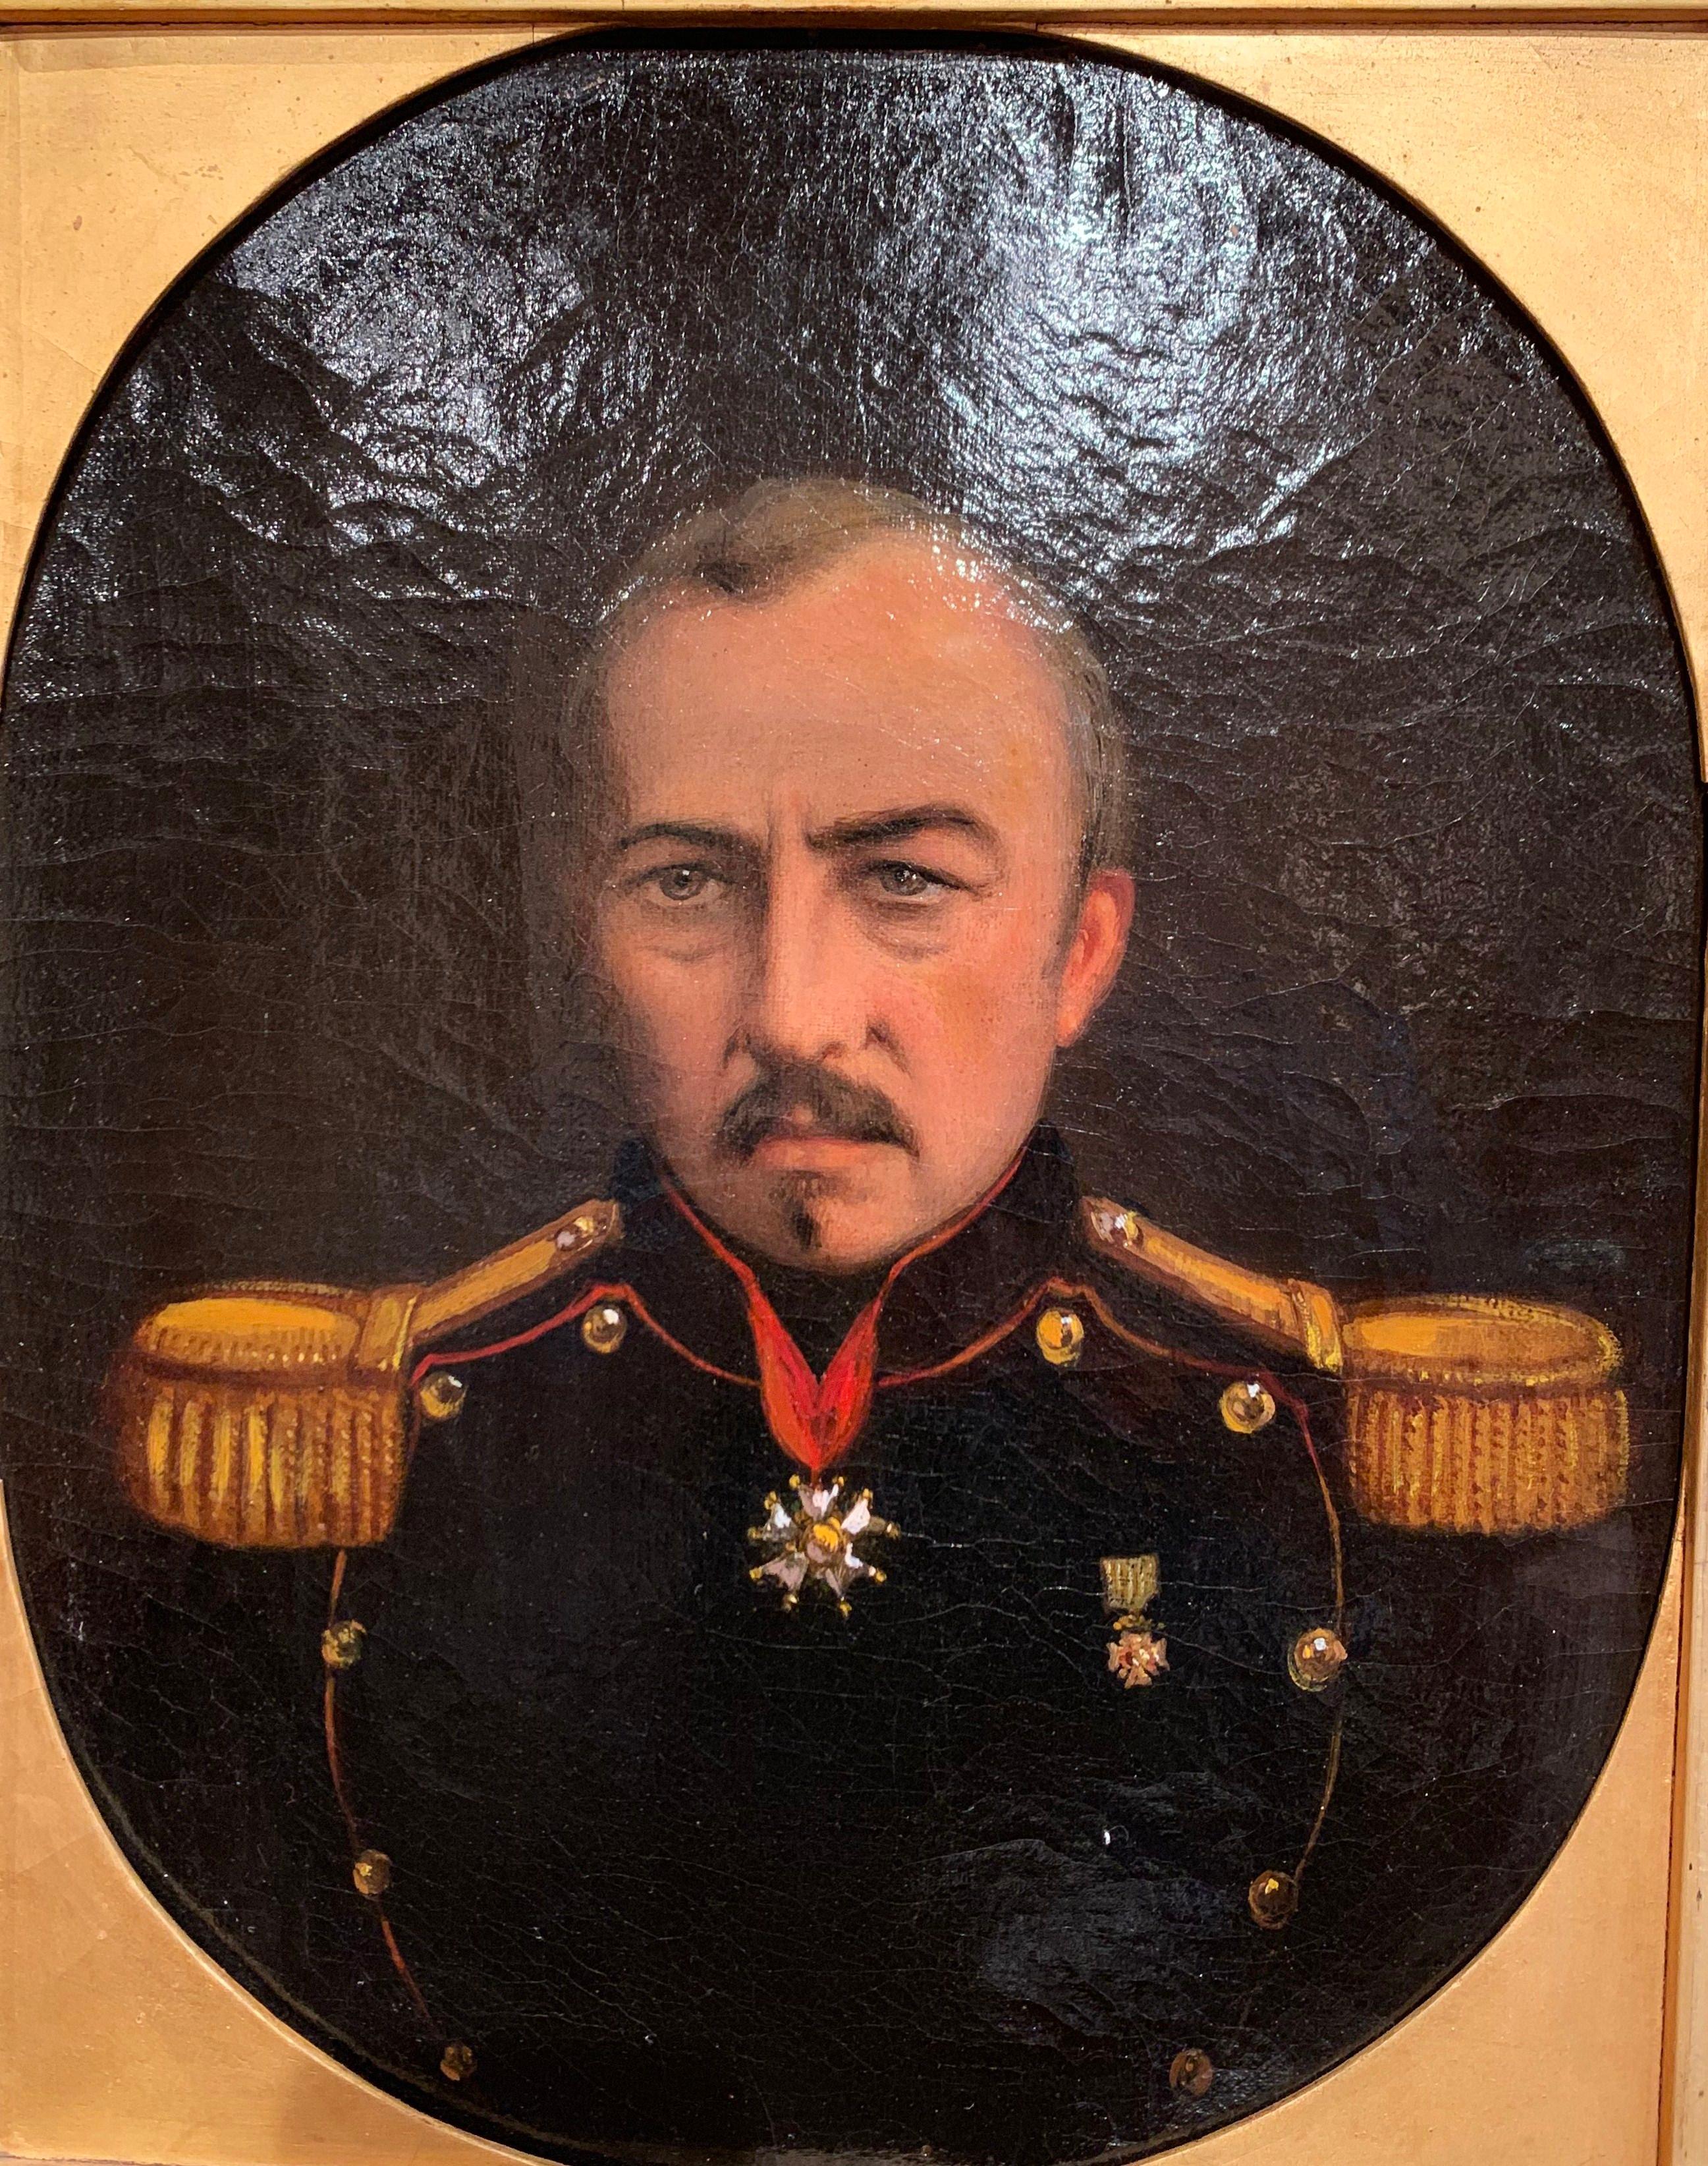 Created in France, circa 1860, this oil on canvas painting depicts the Emperor Napoleon III, nephew of Napoleon Bonaparte, set in the original gilt frame. The art work is in excellent condition with wonderful rich colors.
Napoleon III (1808-1873),